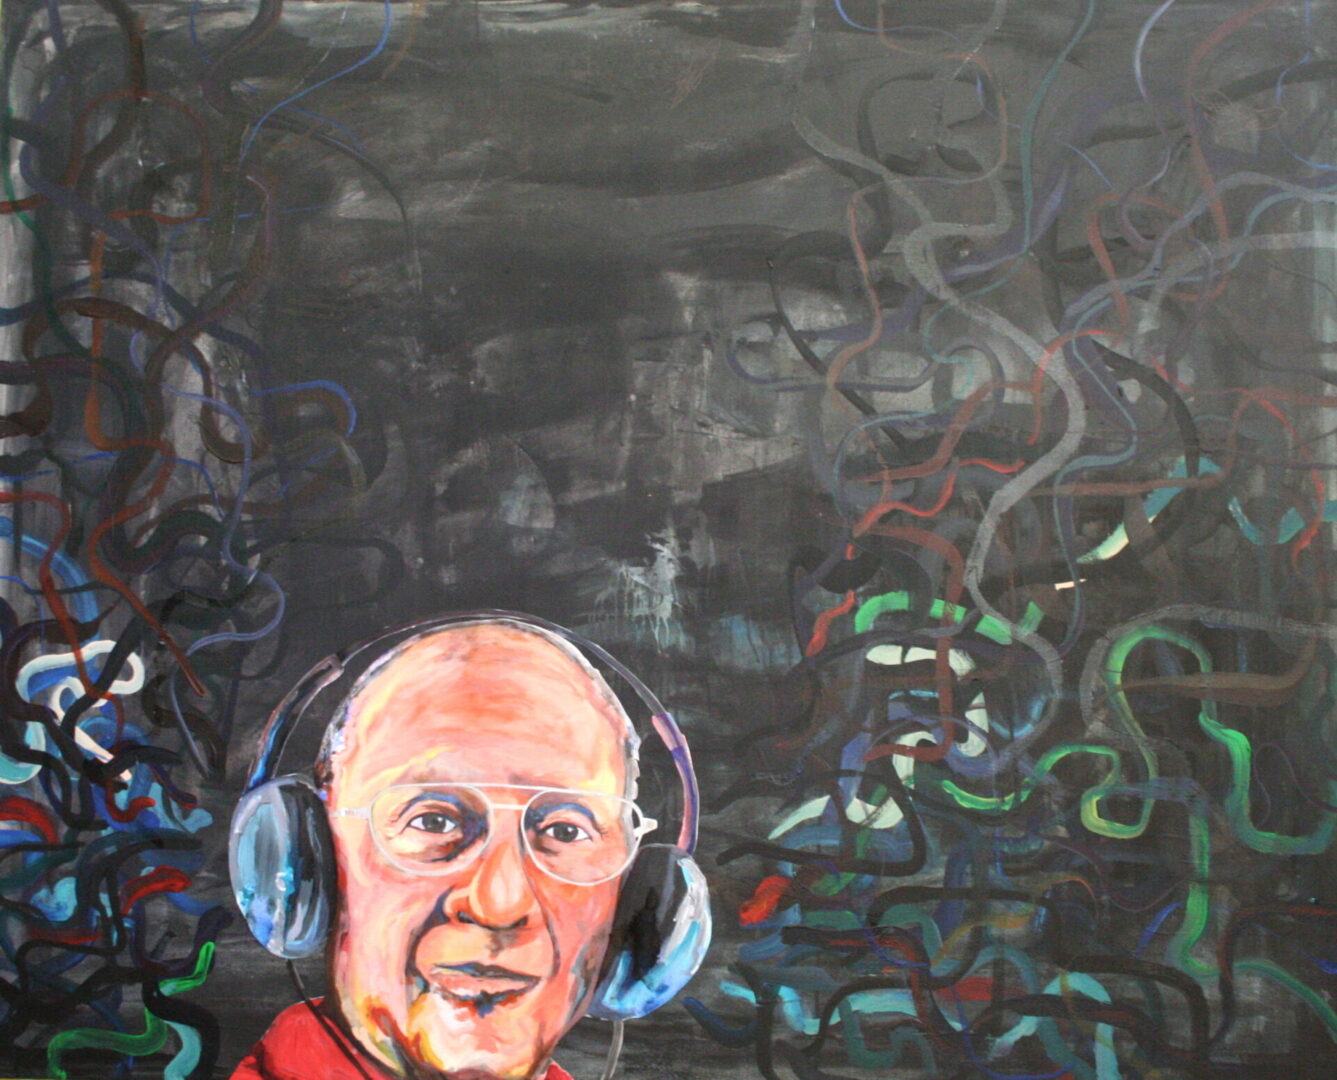 Oil painting of an old man wearing headphones and spectacles